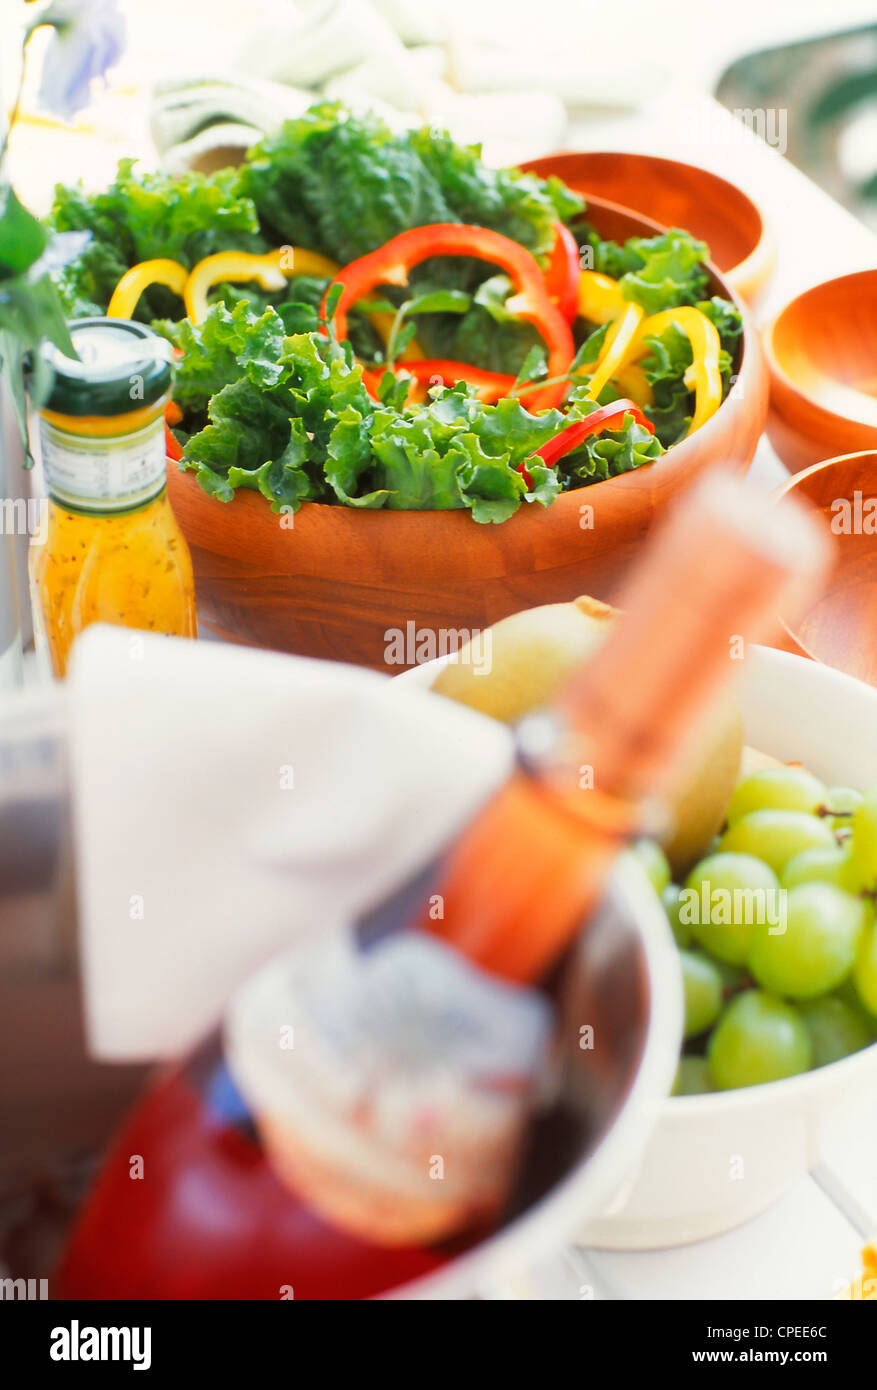 Salad, Fruits And Wine Bottle On Table Stock Photo